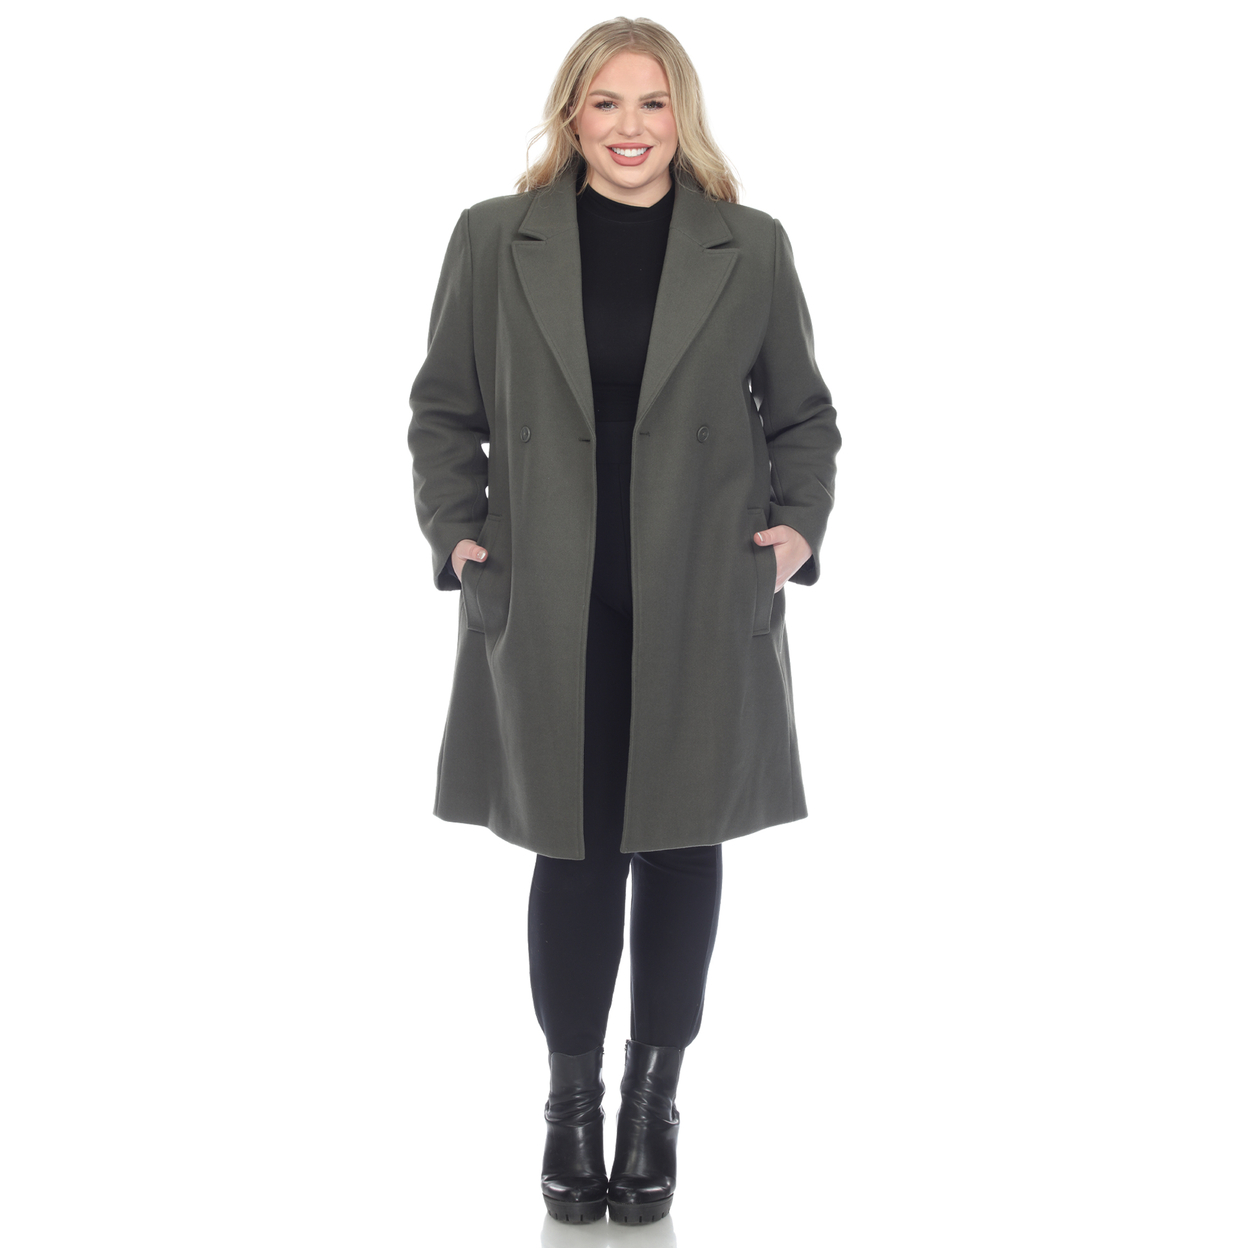 White Mark Women's Long Sleeve Classic Double-Breasted Walker Coat - Olive, 1X